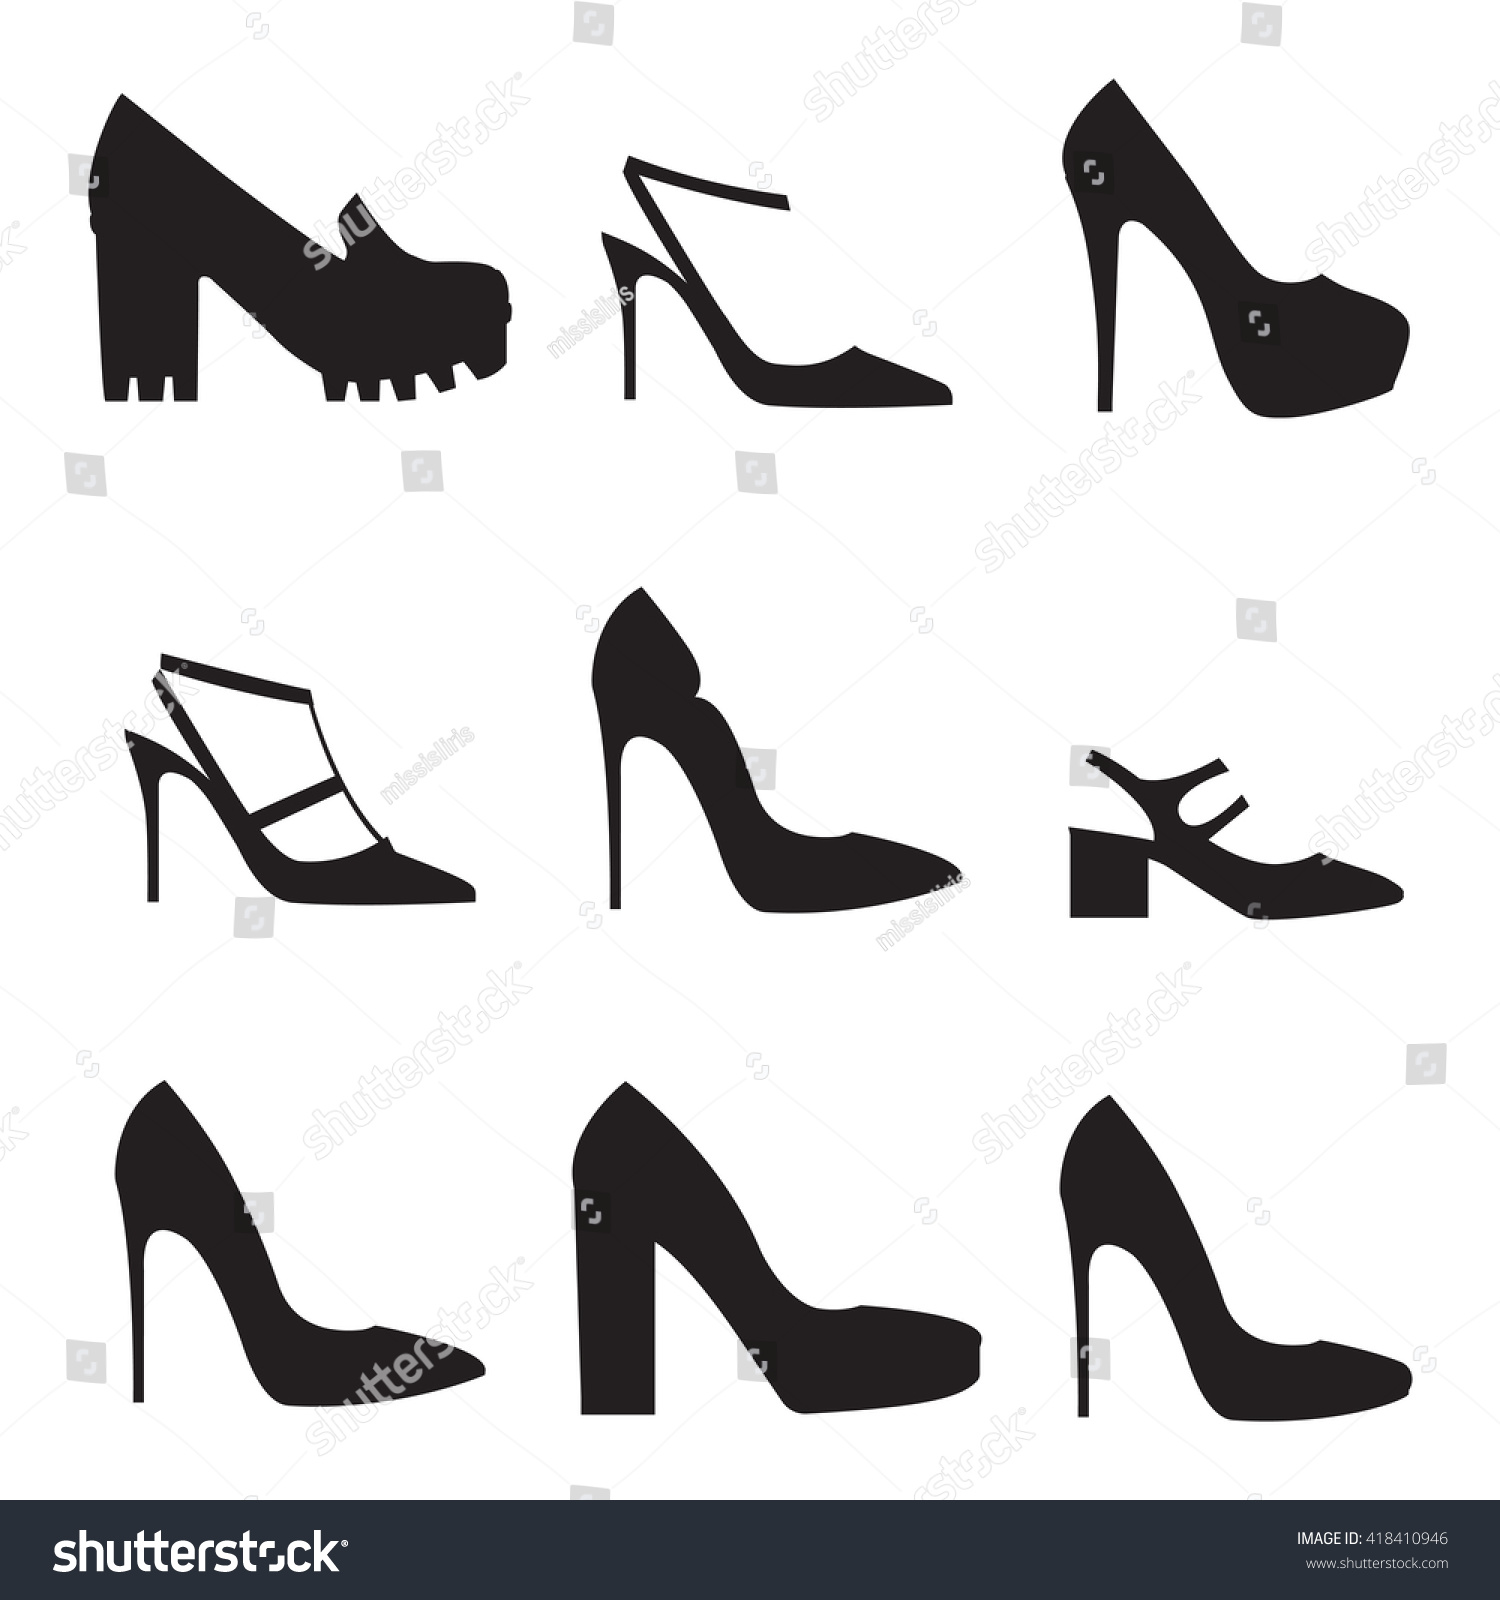 Vector Illustration Silhouettes Modern Shoes On Stock Vector (Royalty ...